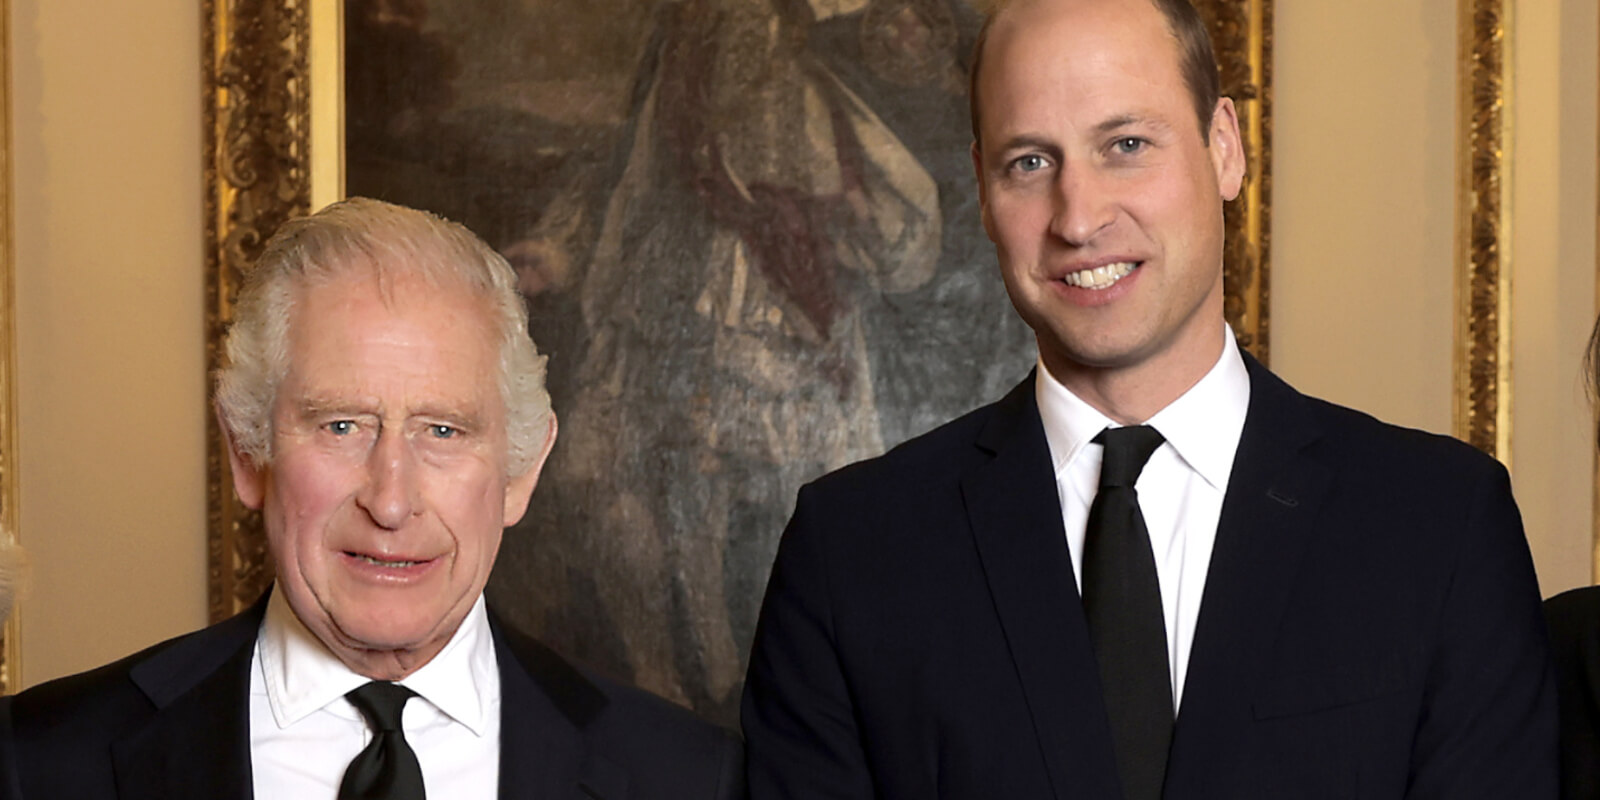 King Charles and Prince William in a formal portrait.